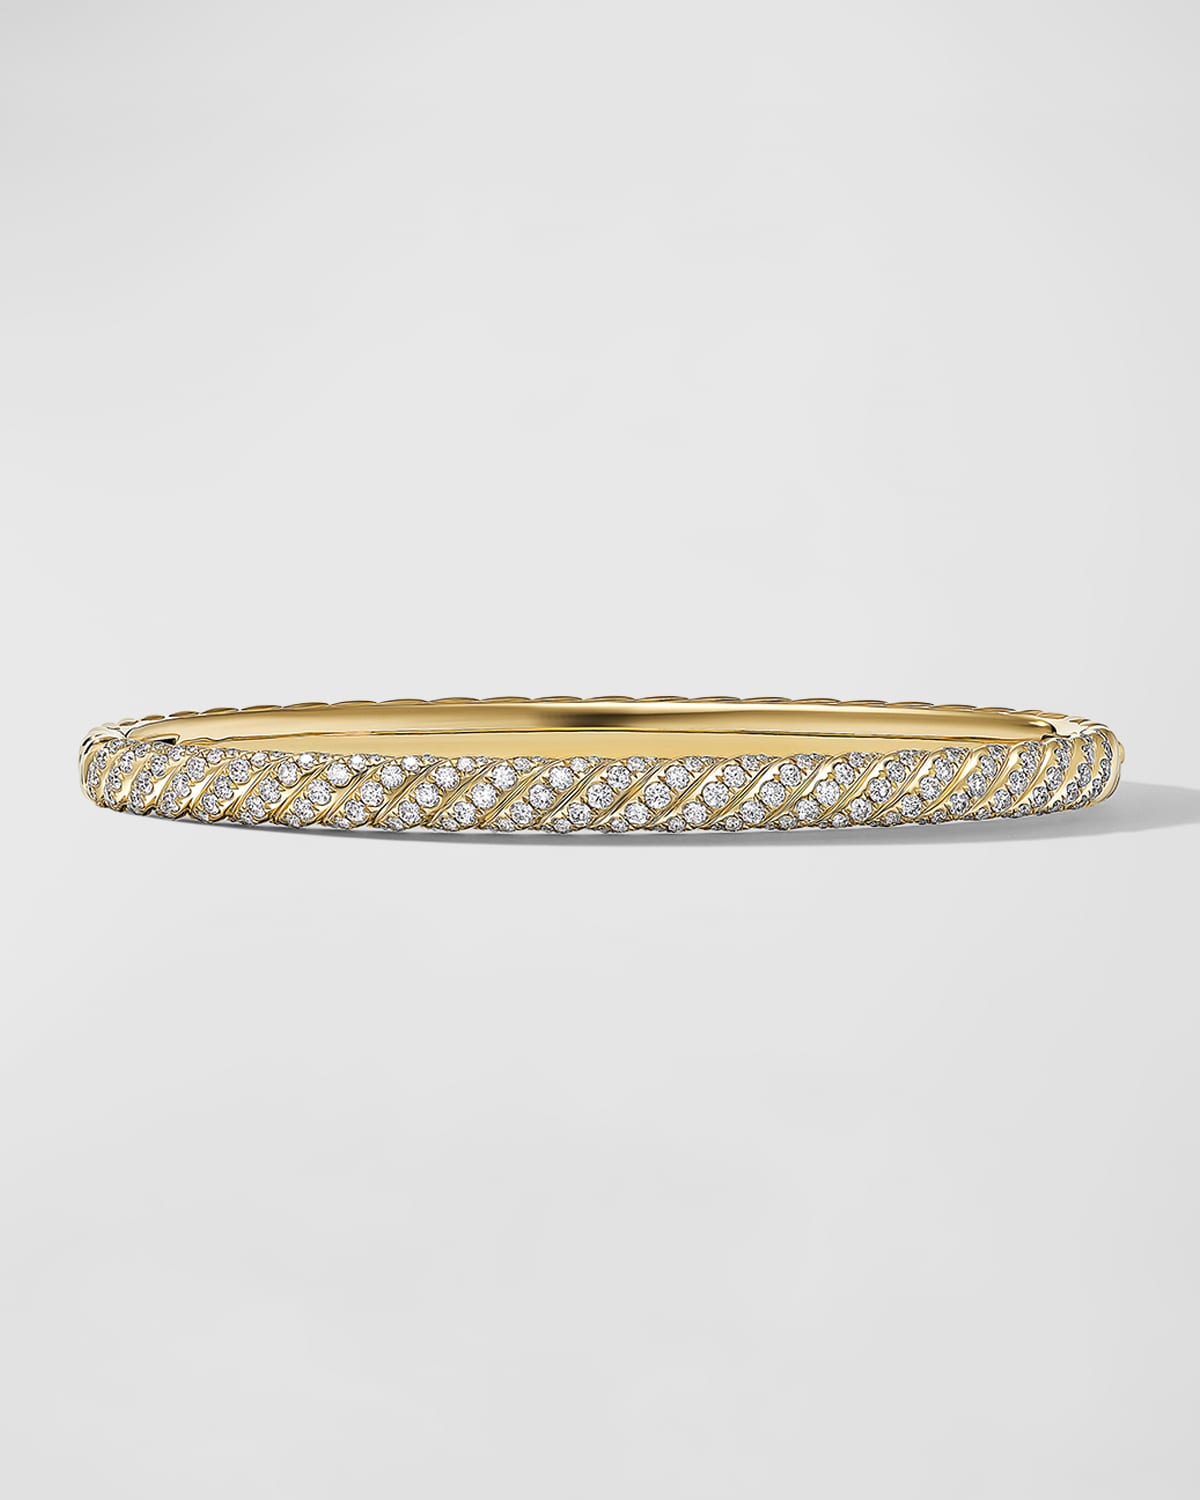 David Yurman Sculpted Cable Bracelet with Diamonds in 18K Gold, 4.5mm, Size M